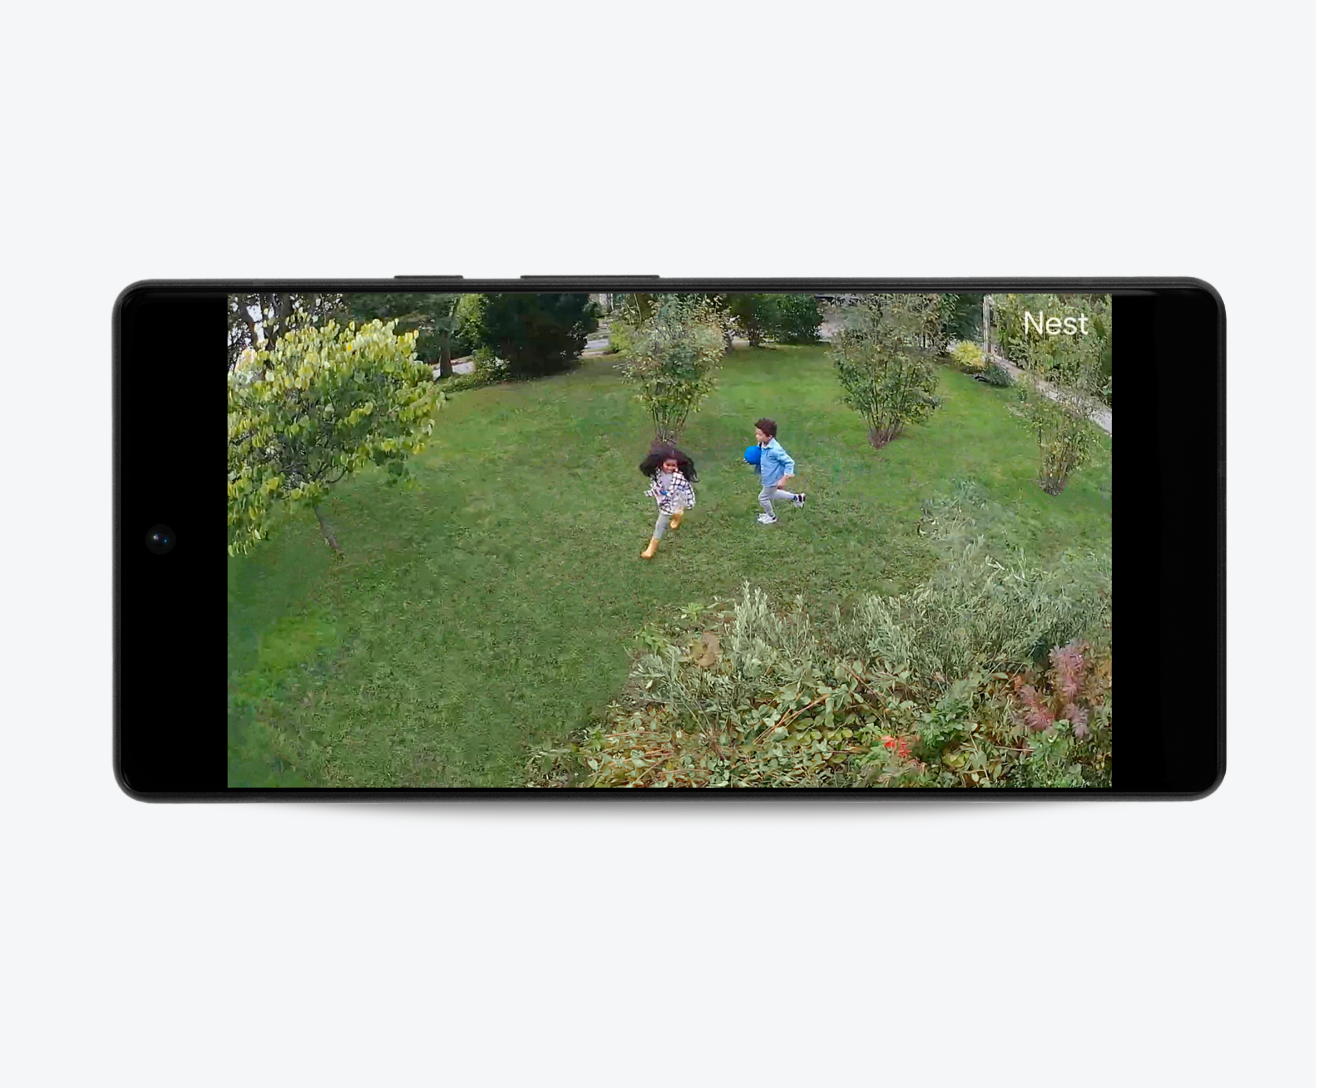 Live footage on a cellphone showing children playing in the backyard 